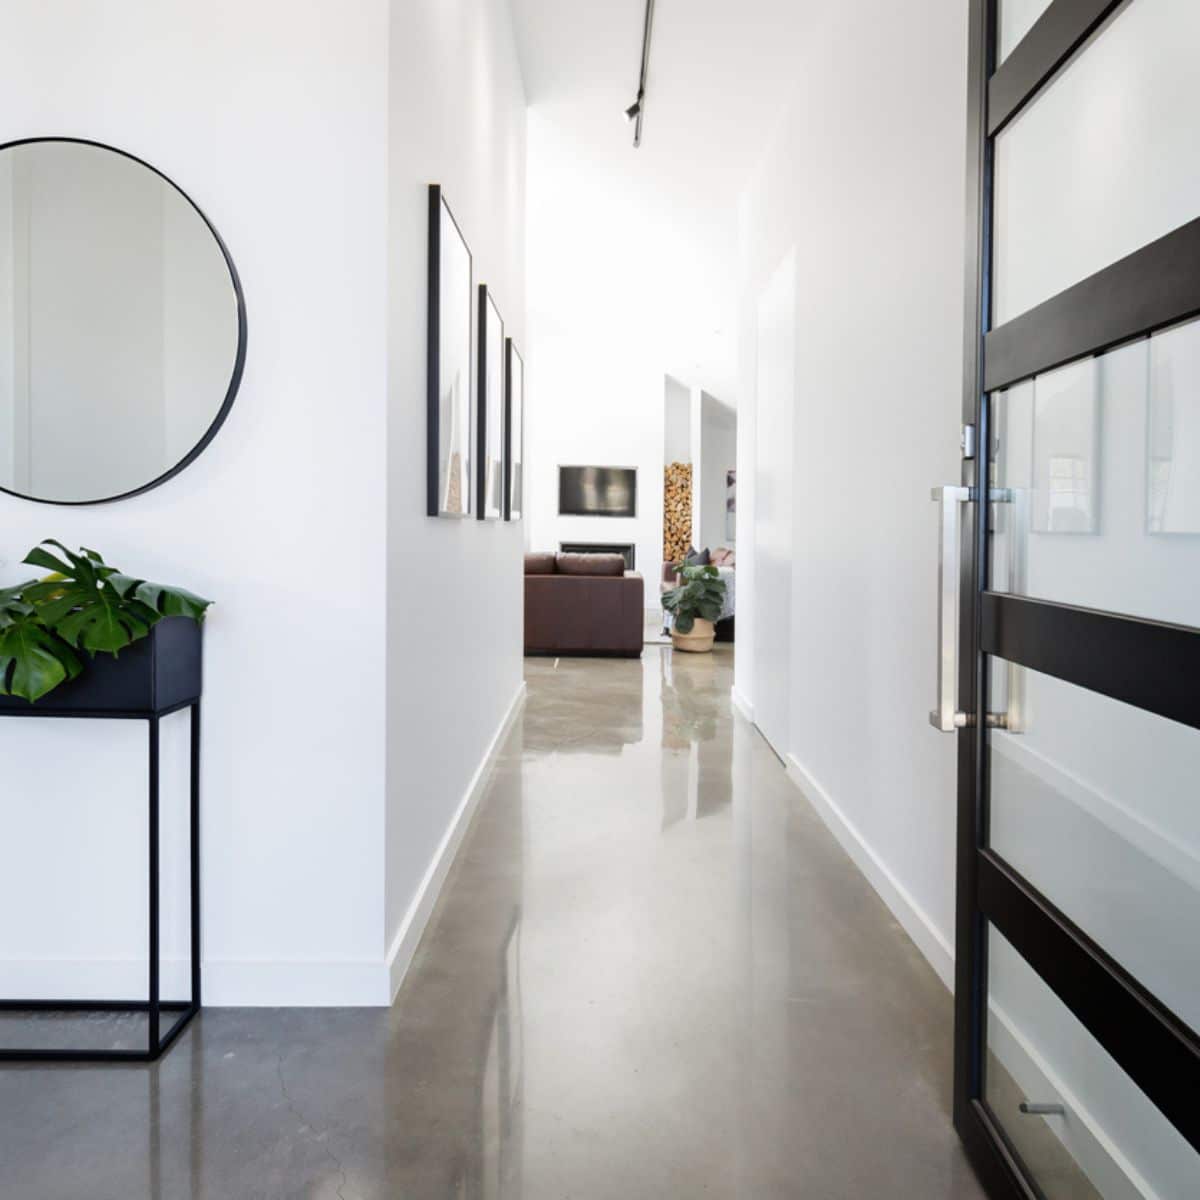 A white hallway entrance with black accent details